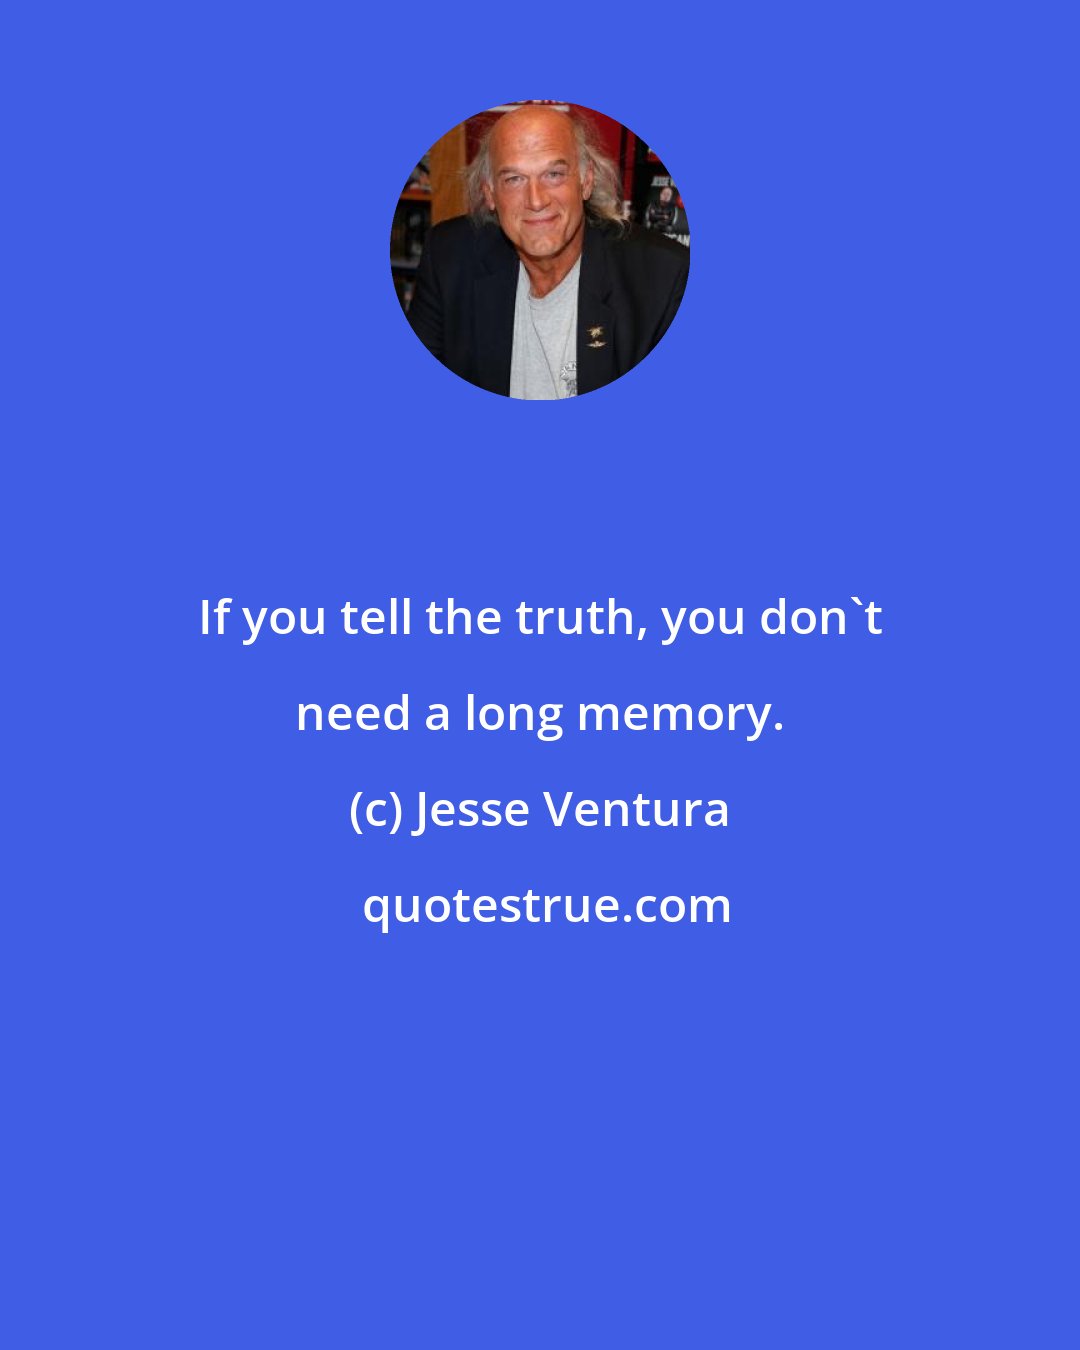 Jesse Ventura: If you tell the truth, you don't need a long memory.